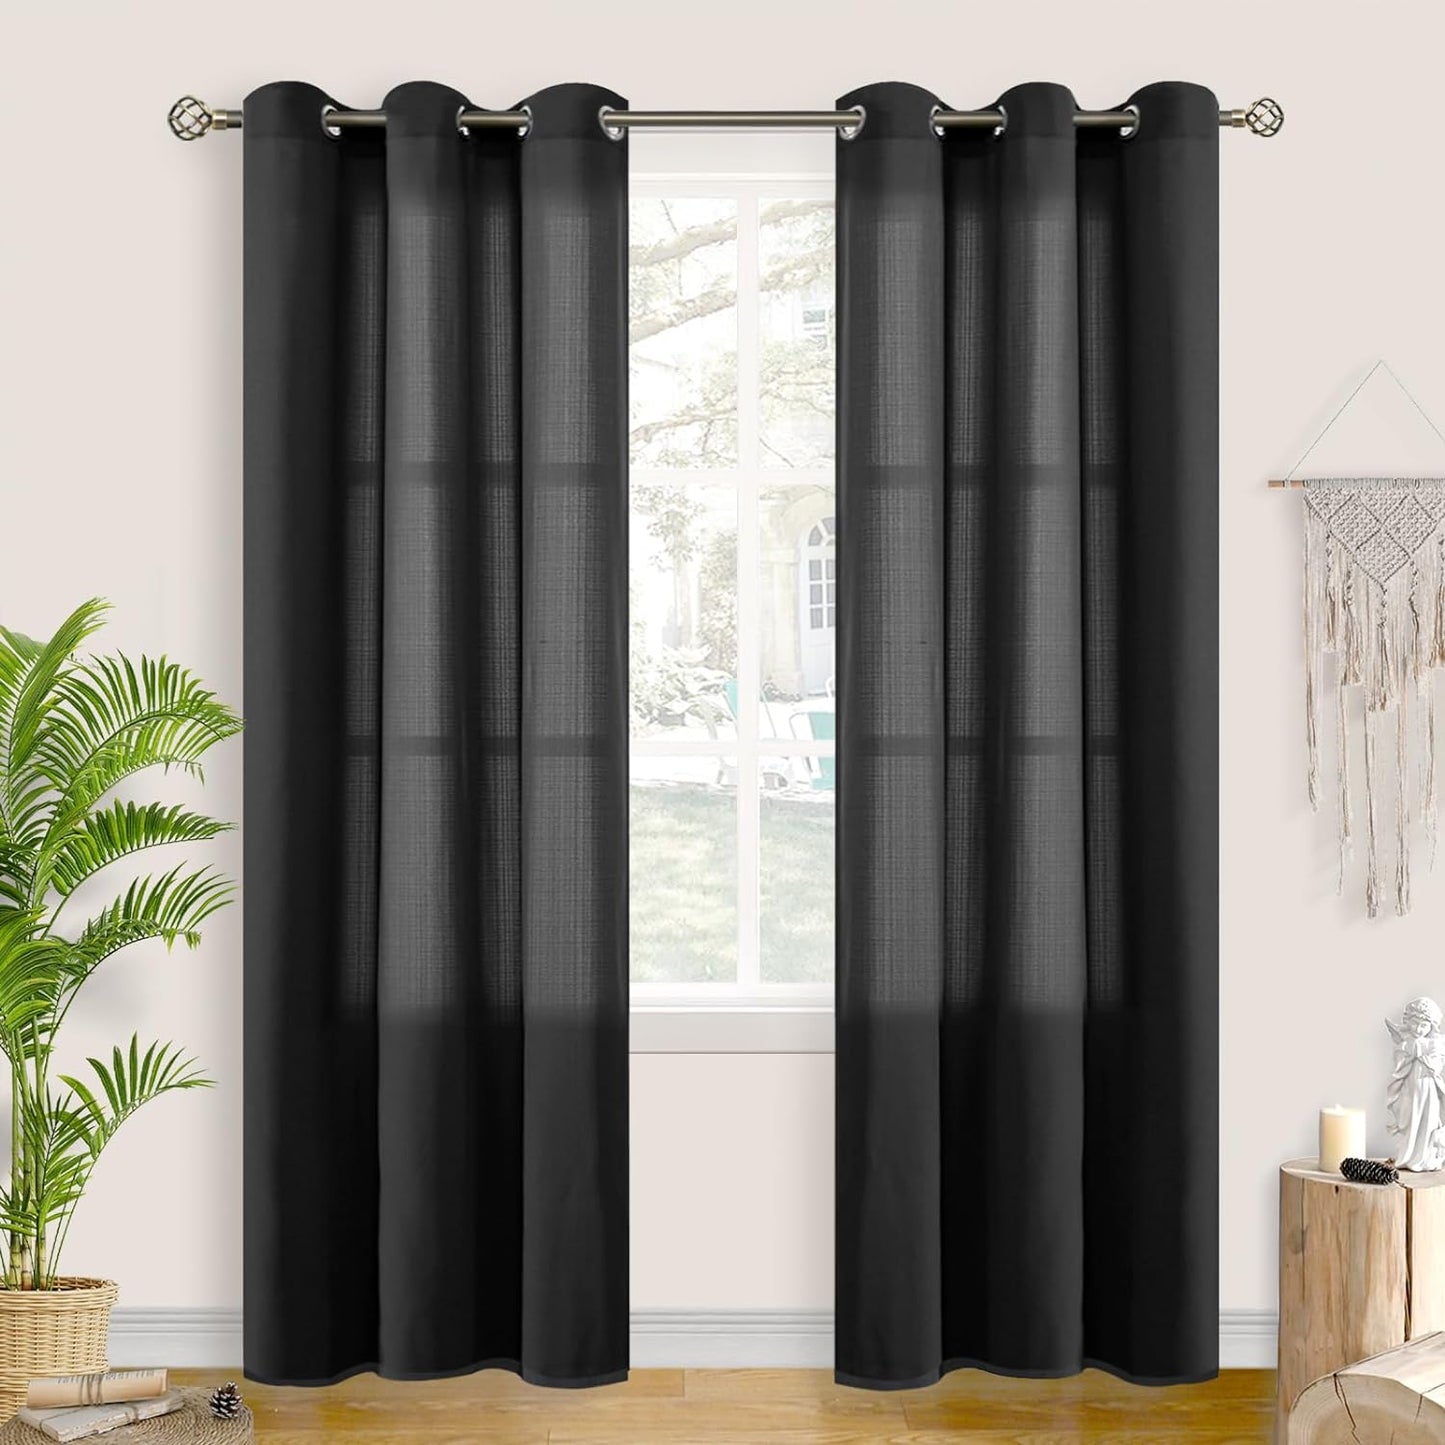 Bgment Natural Linen Look Semi Sheer Curtains for Bedroom, 52 X 54 Inch White Grommet Light Filtering Casual Textured Privacy Curtains for Bay Window, 2 Panels  BGment Black 42W X 84L 